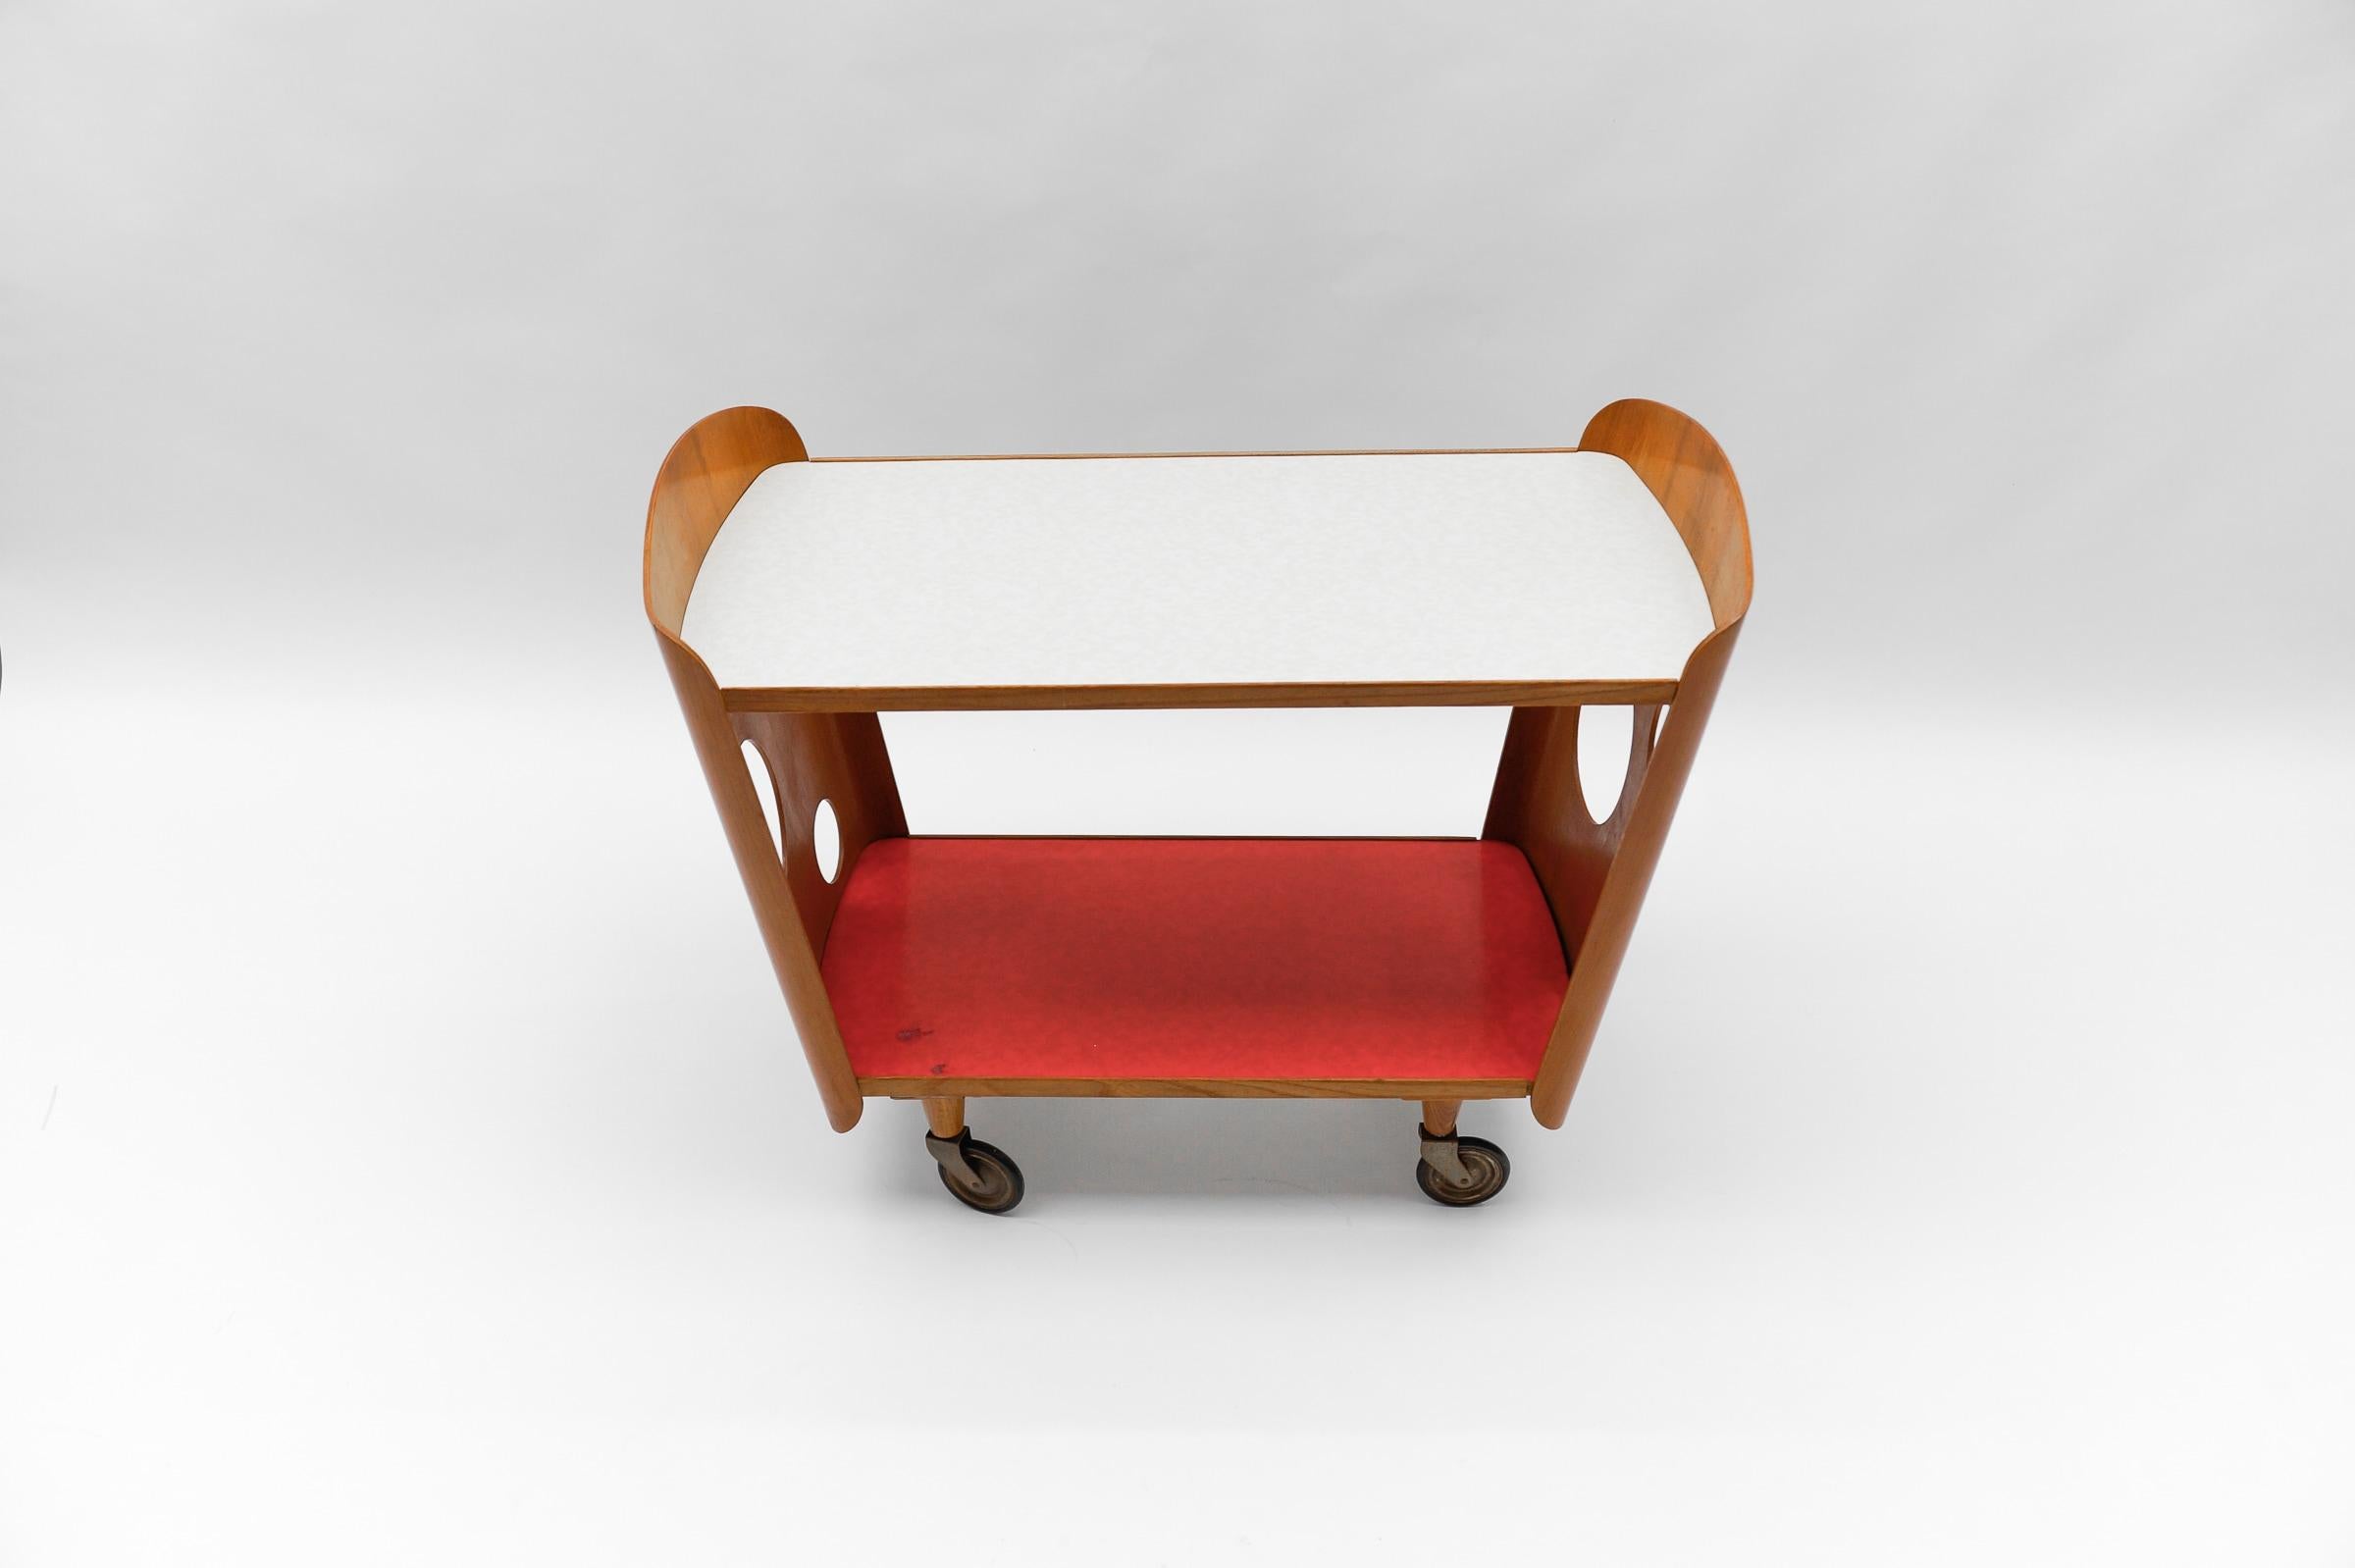 Stunning Mid-Century Modern Serving Cart in Plywood, 1950s For Sale 4